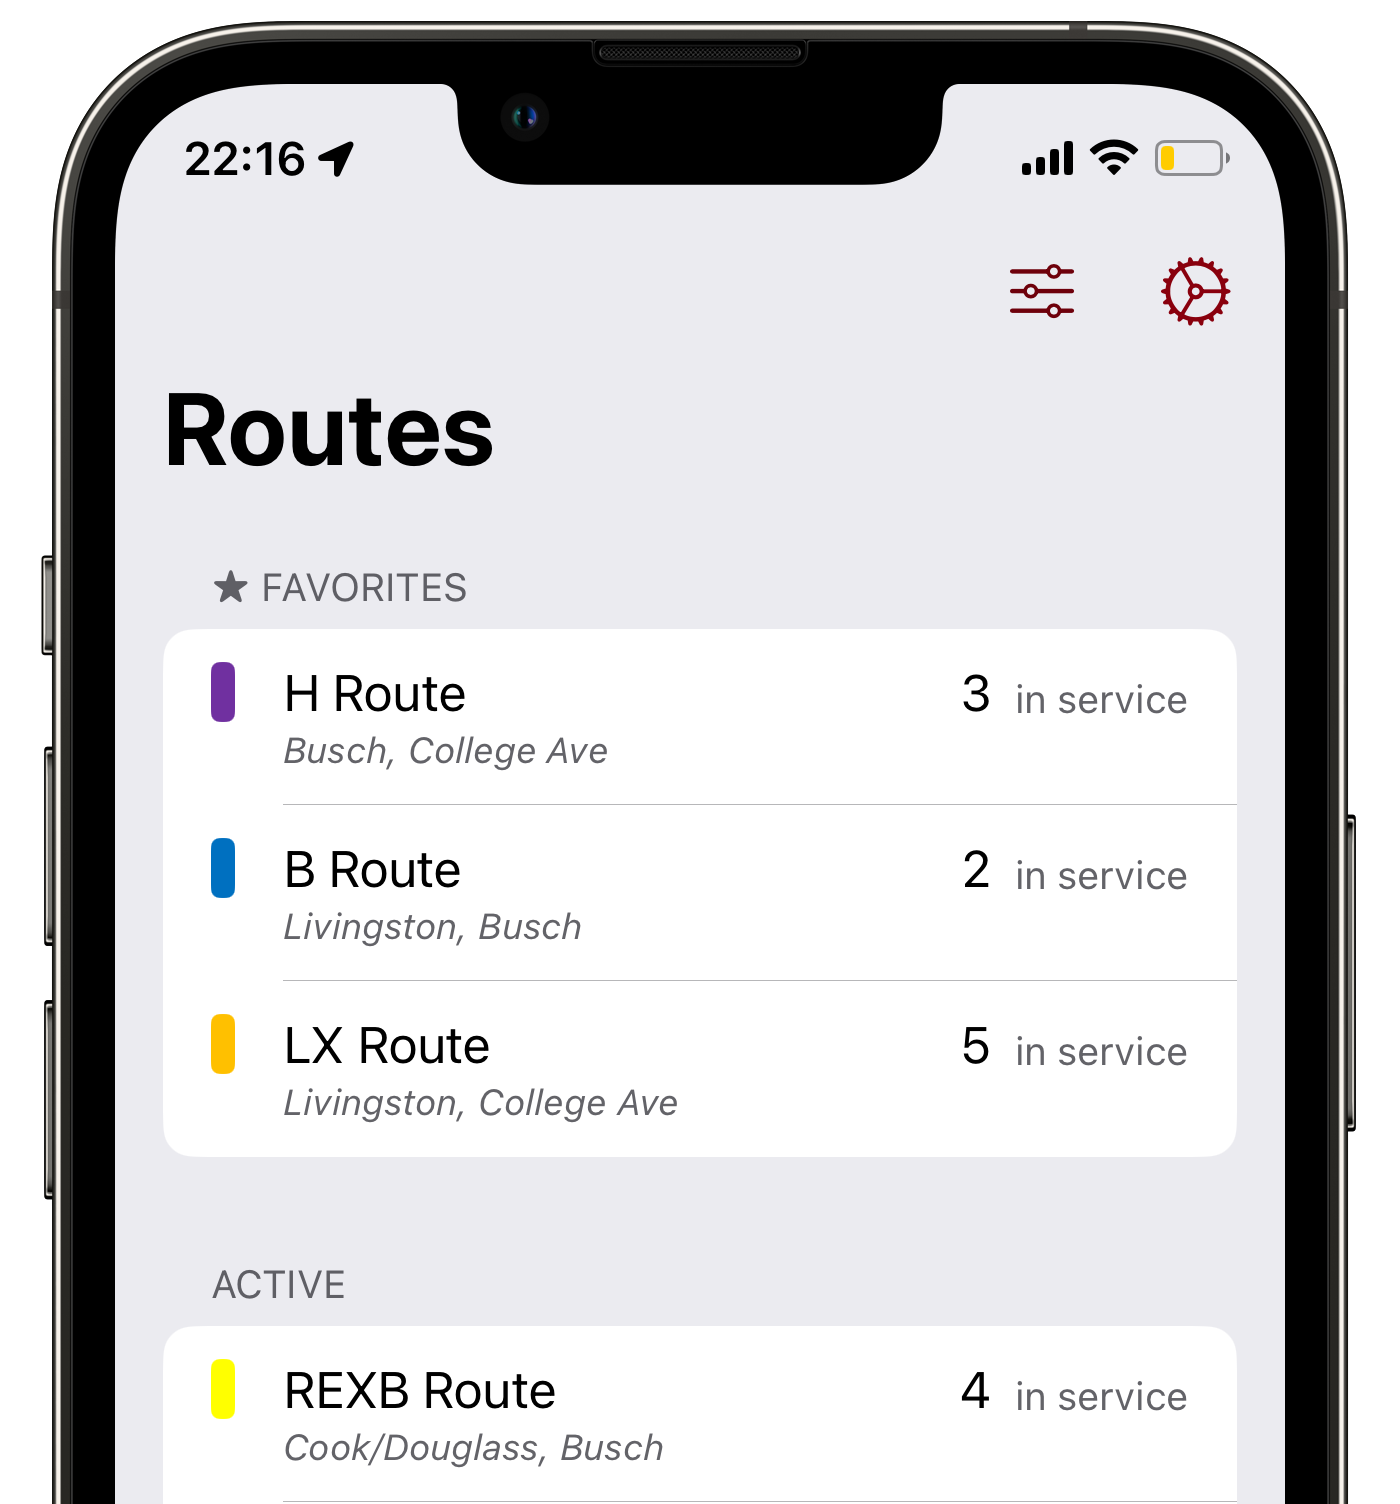 Screenshot of Routes Page in the RURadar App